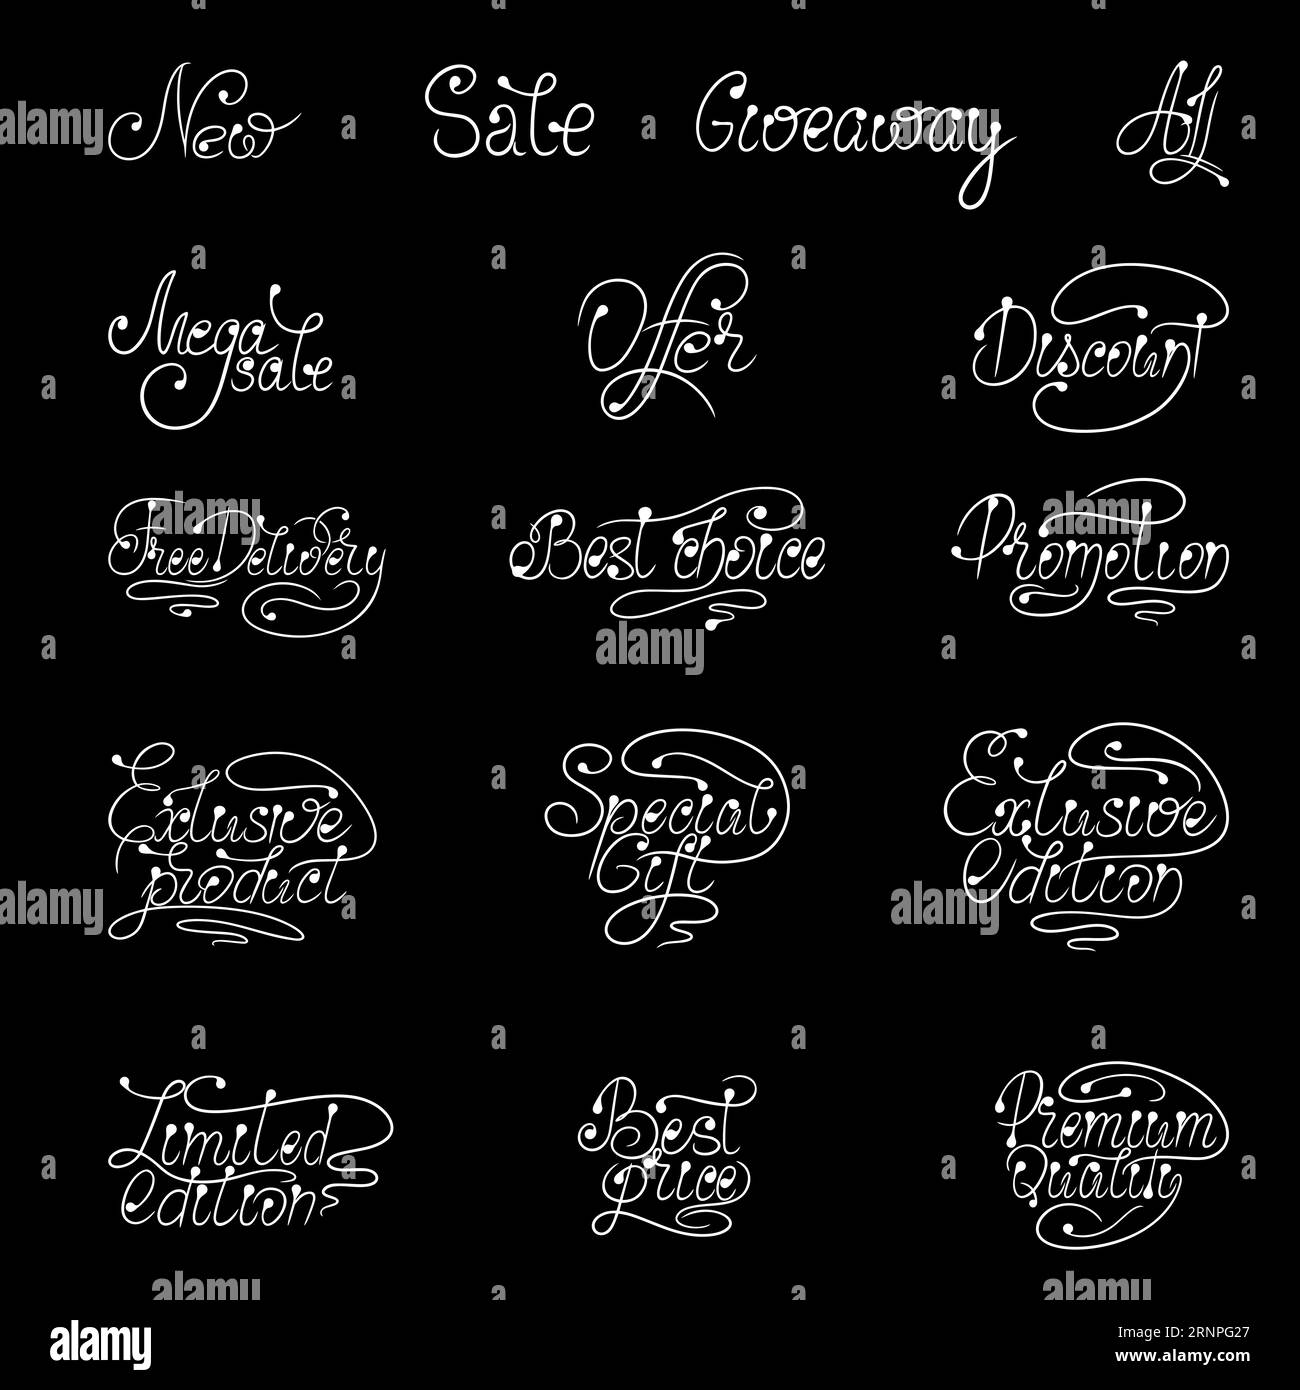 Vector calligraphic lettering template on black background for big sale, discounts, special offers. A marketing solution with beautifully written word Stock Vector